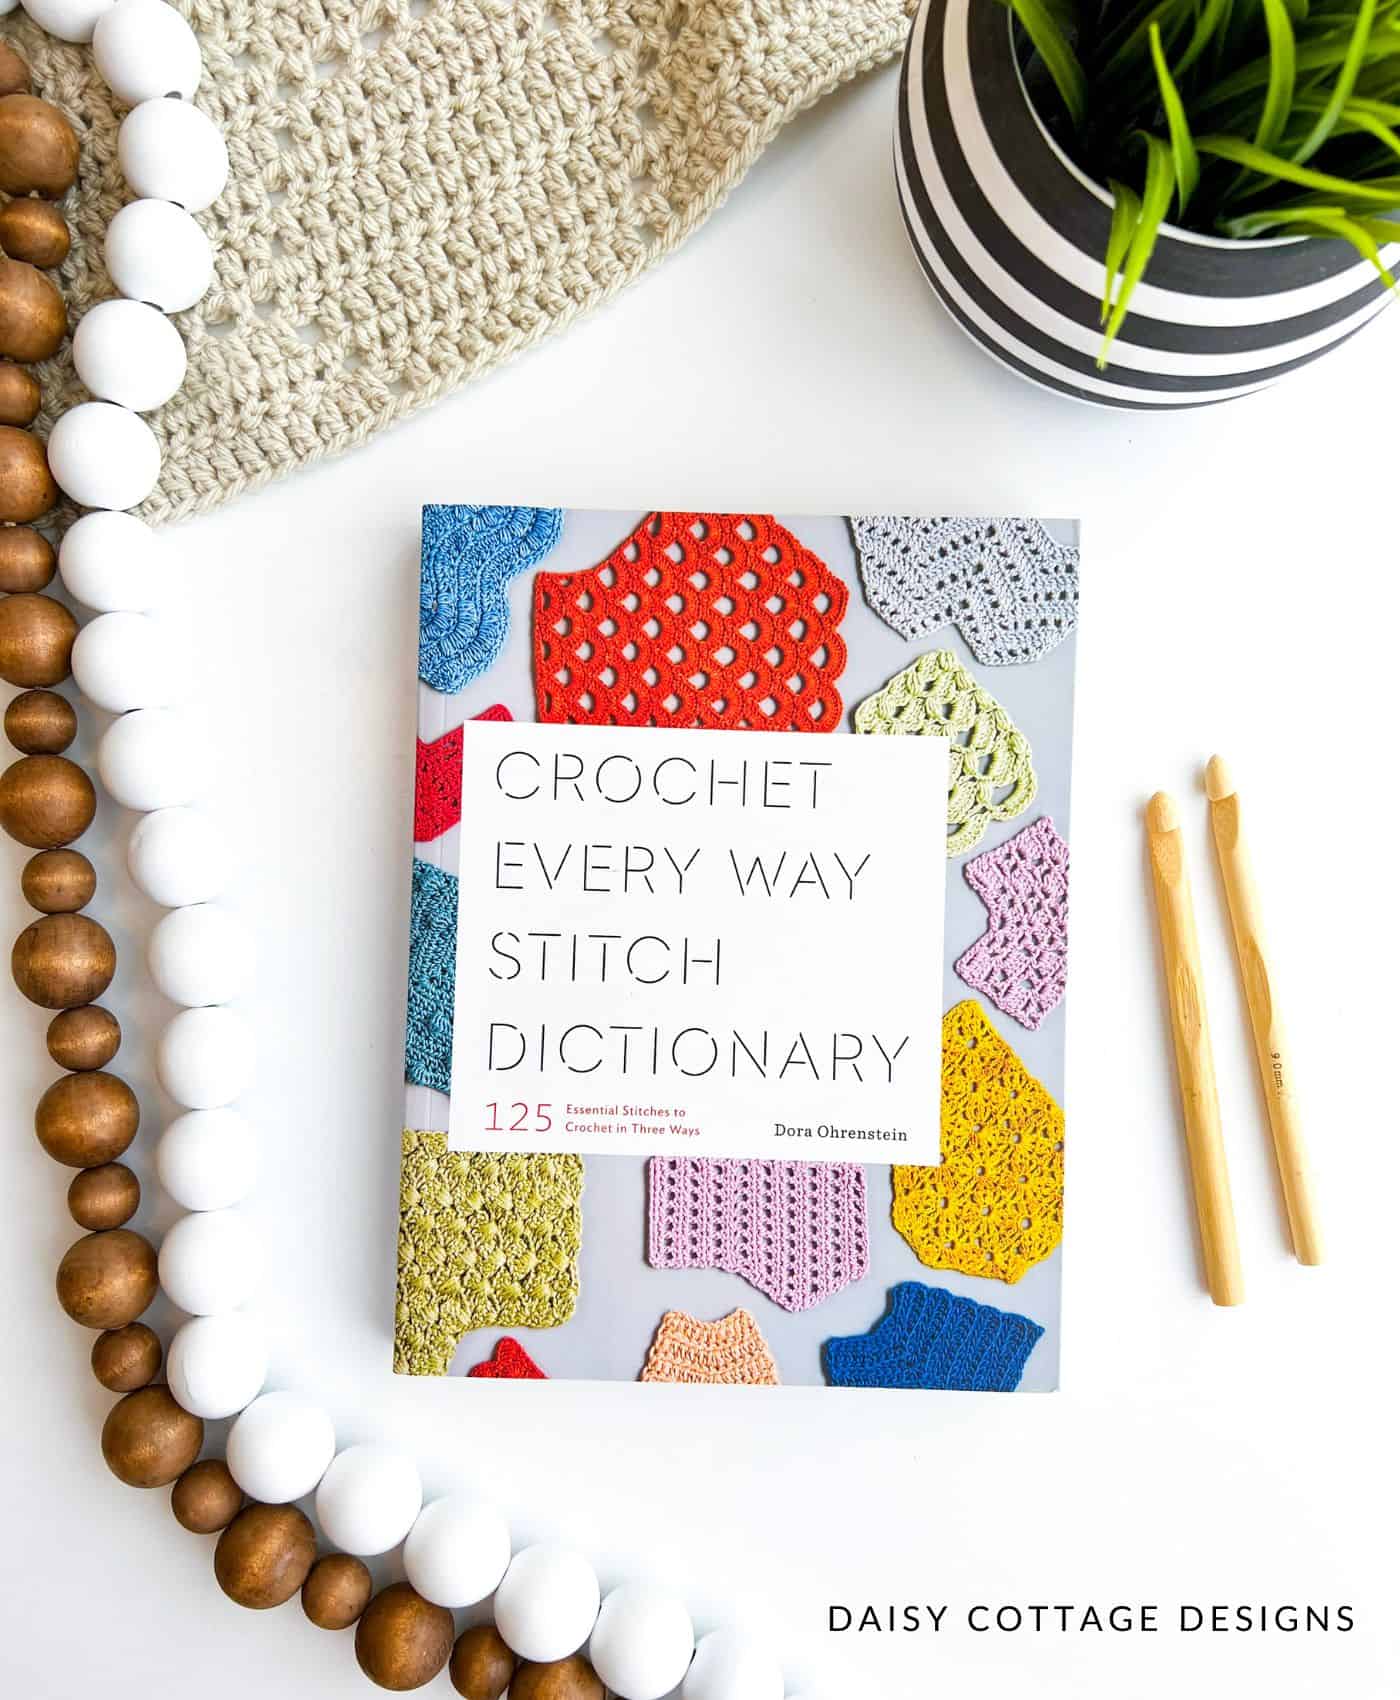 5 Best Crochet Stitch Dictionaries (for all levels)